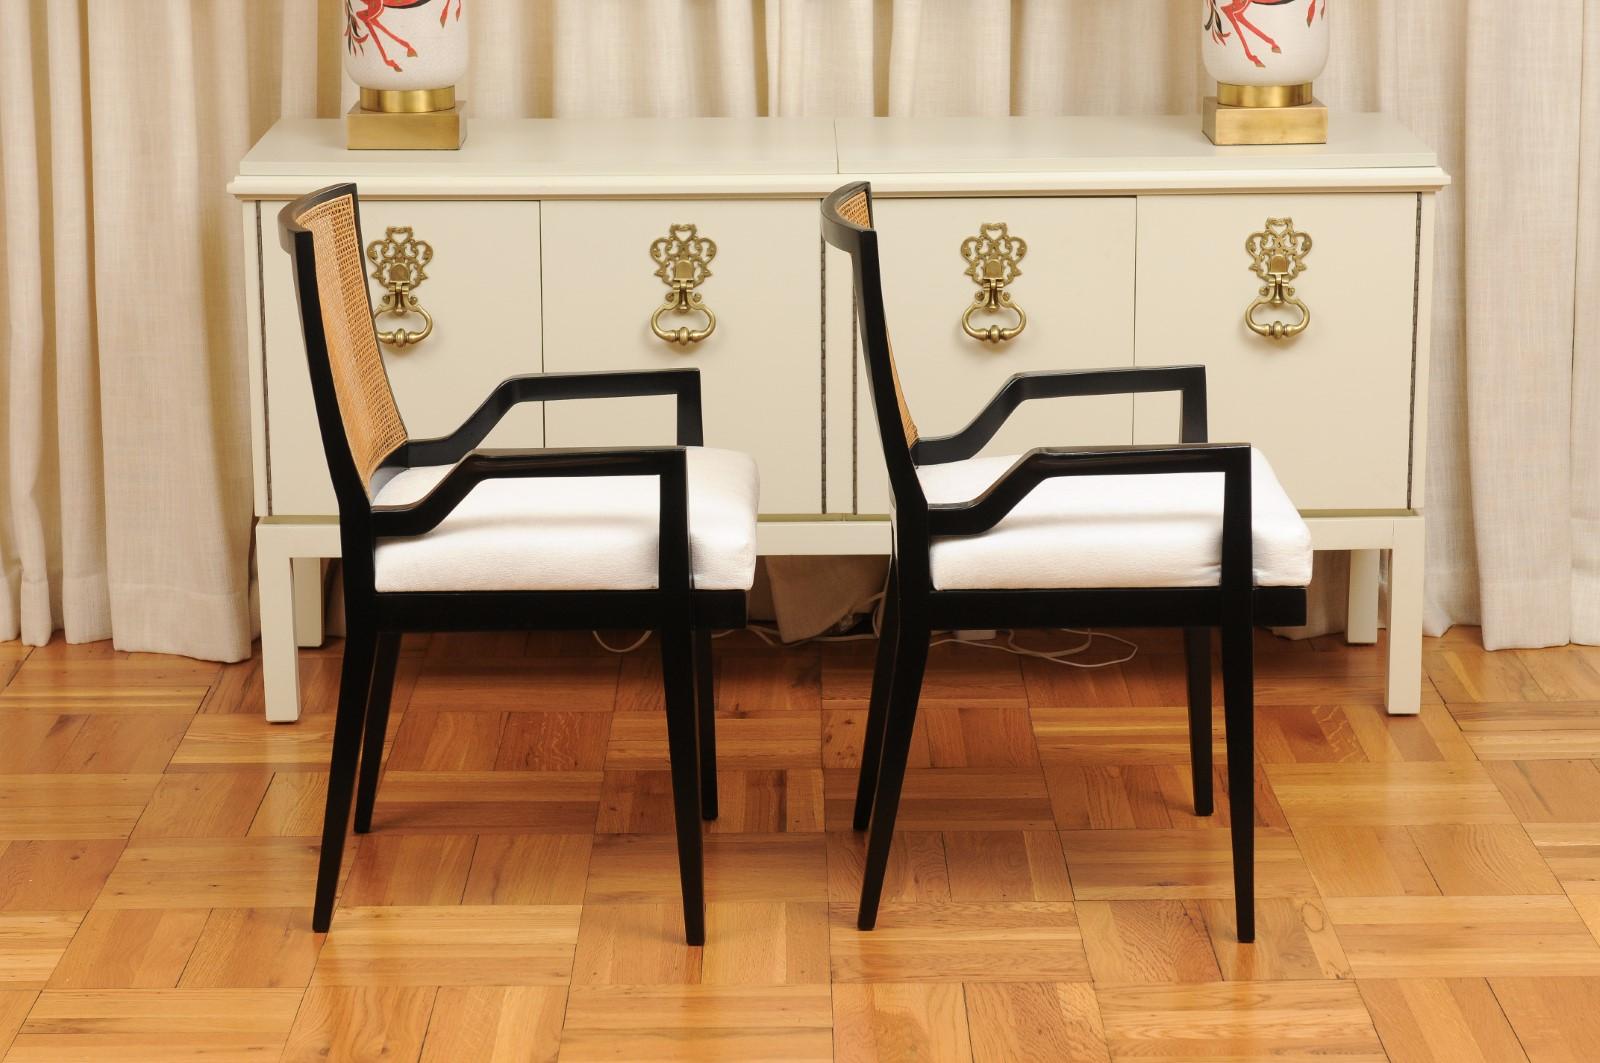 ALL ARMS Set of 8 Black Lacquer Cane Dining Chairs by Michael Taylor, circa 1960 For Sale 3